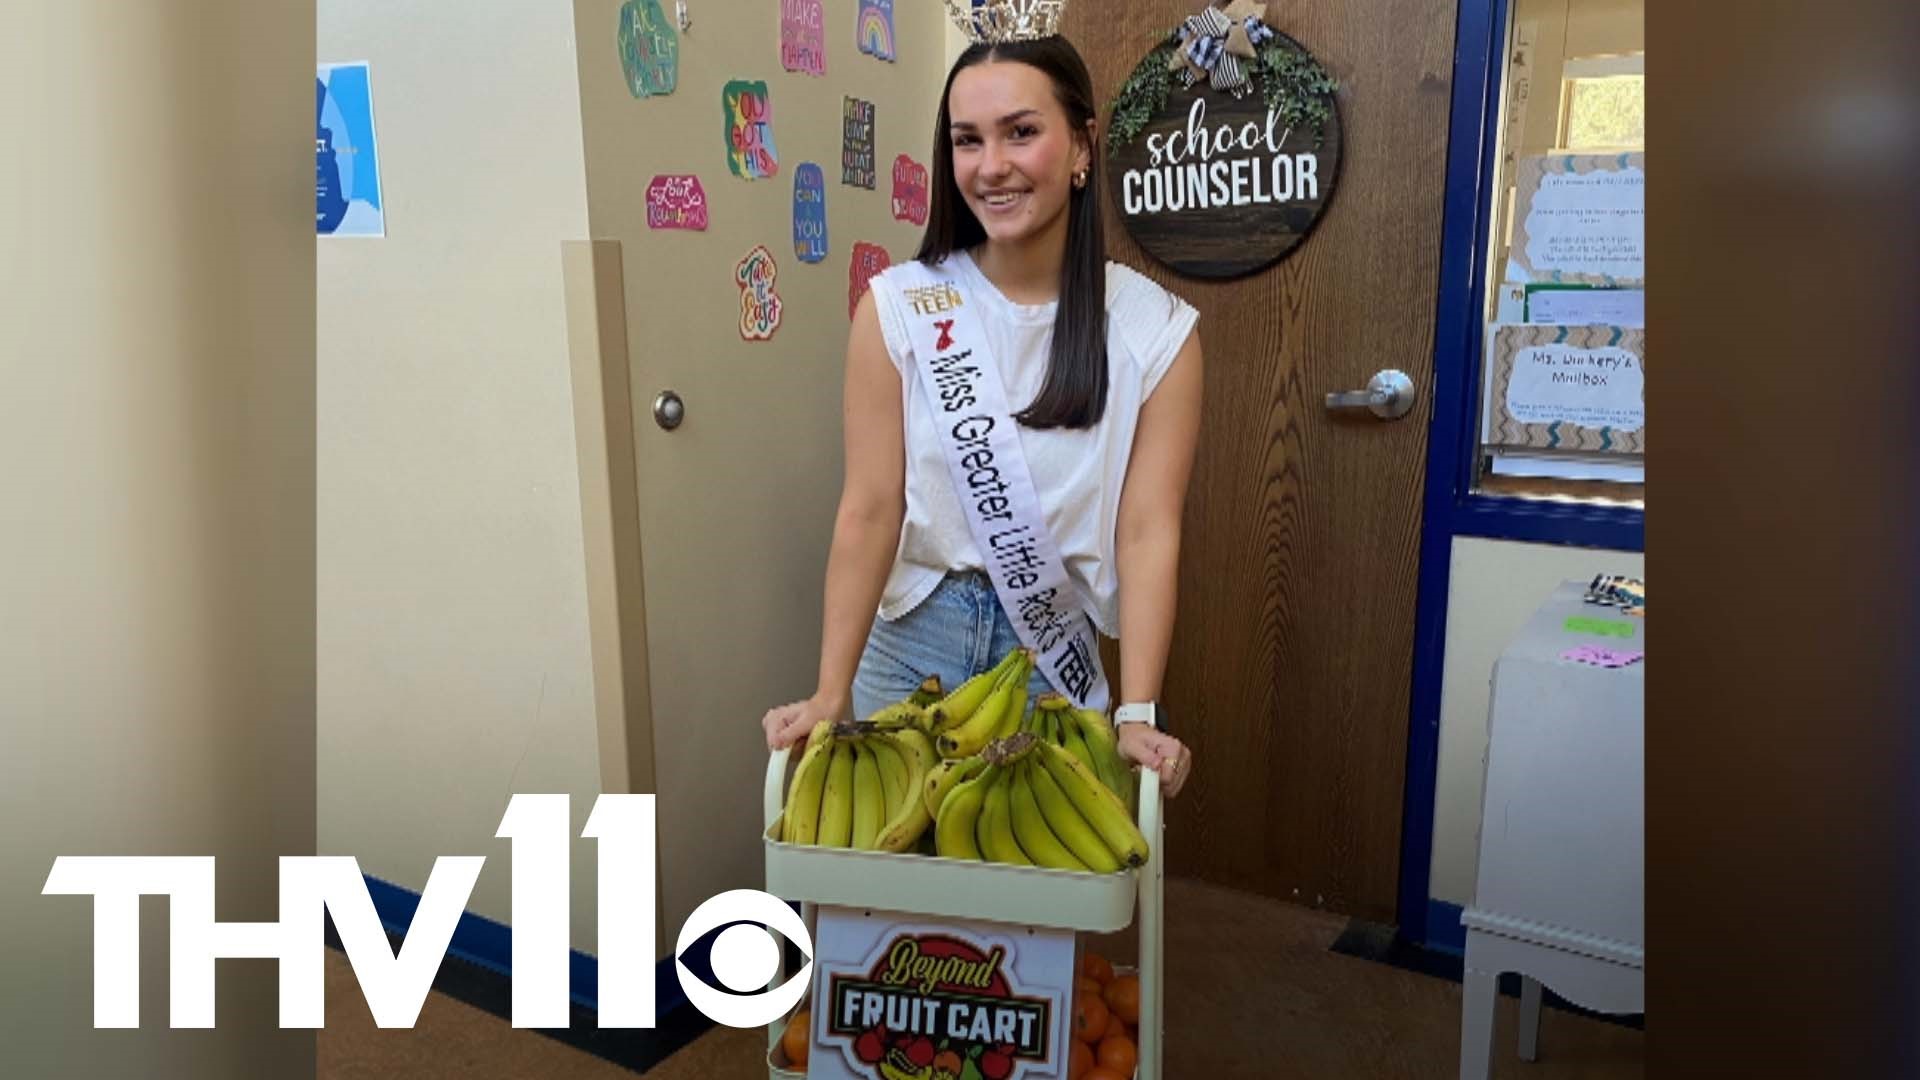 16-year-old Bella Crowe is making a difference in her community one cart of fruit at a time-- all part of an initiative to advocate for teen health.